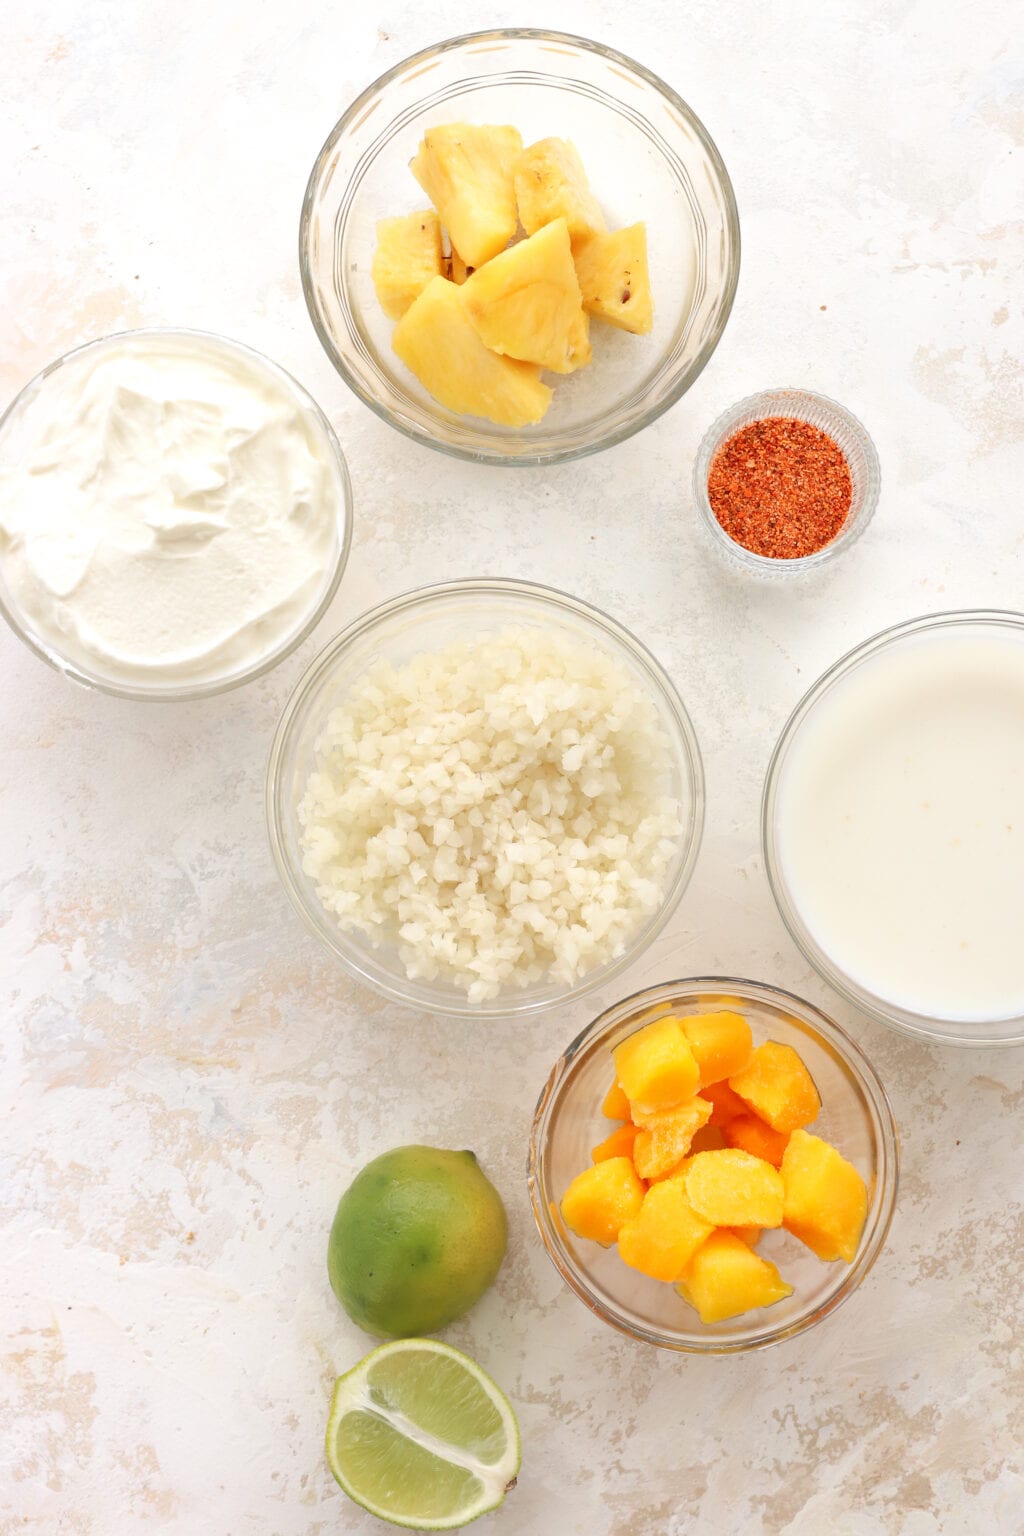 The ingredients of the mango and pineapple smoothie are laid out individually in clear bowls. At the top is a bowl of pineapple, in the middle there is a bowl of Greek yogurt, a small bowl of tajin spice, a bowl of riced cauliflower, and a bowl of milk. At the bottom is a lime cut in half beside a bowl of frozen mango.